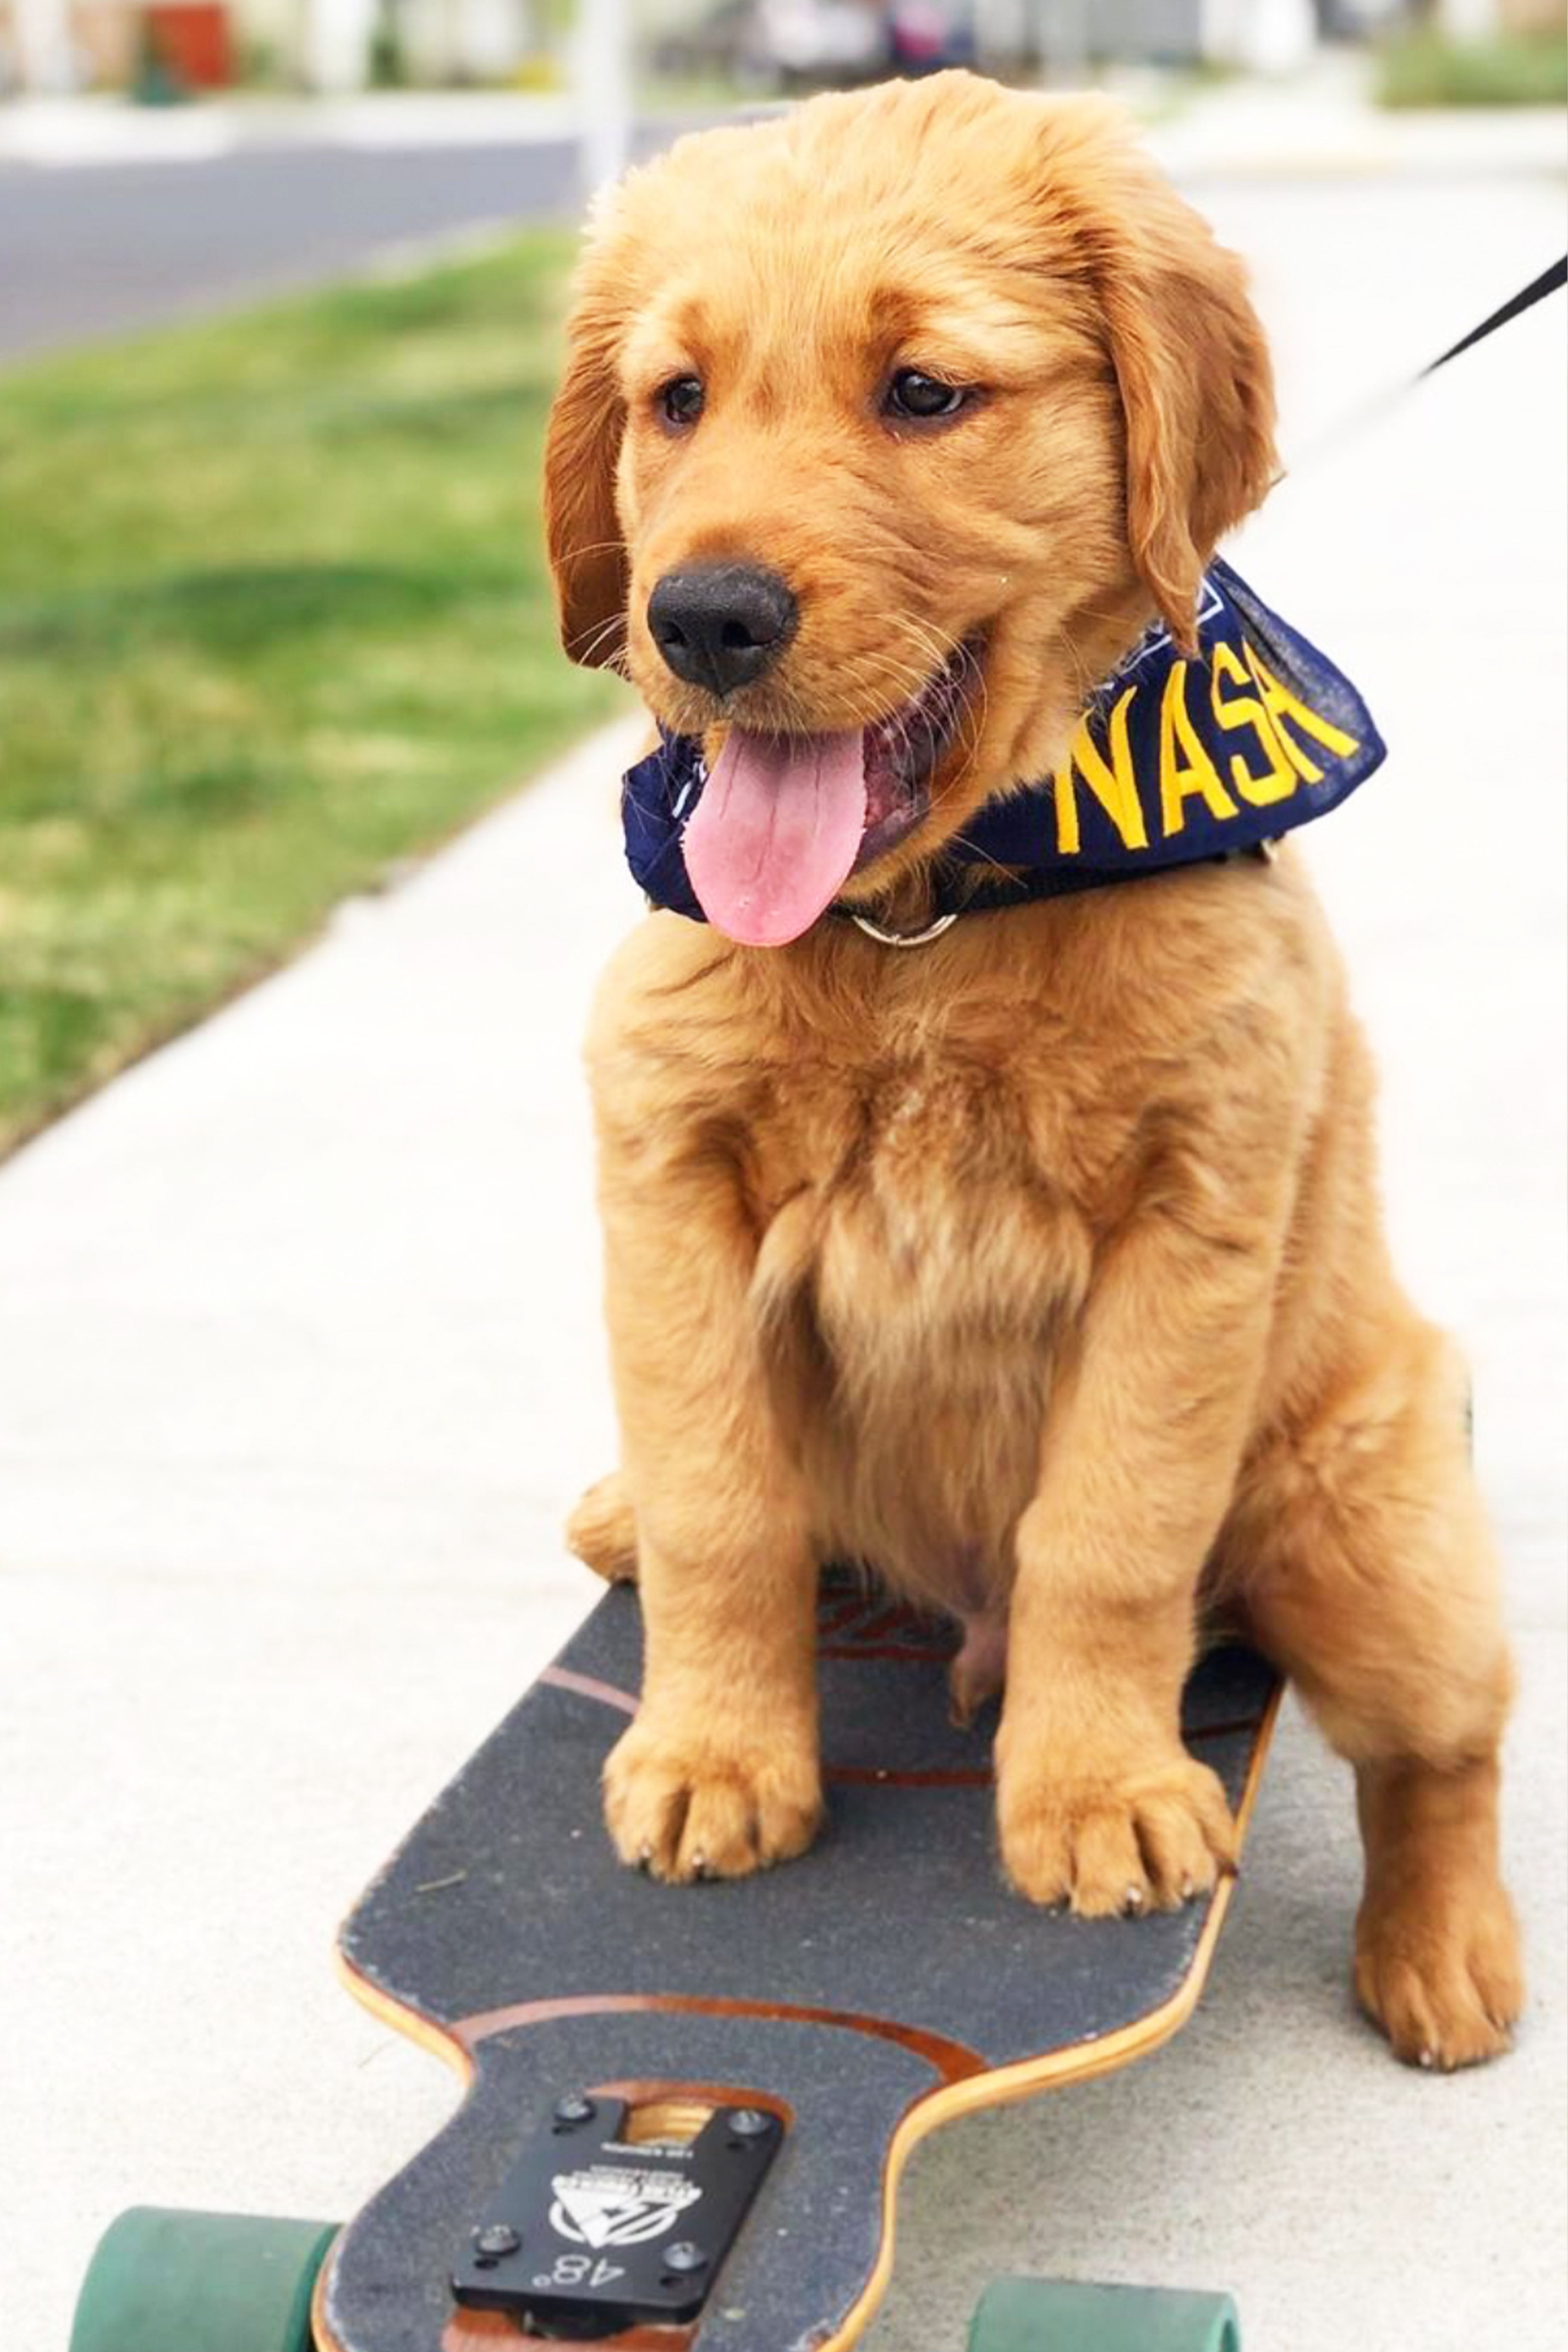 Puppy on skateboard wearing Navy bandana with gold embroidered NASH